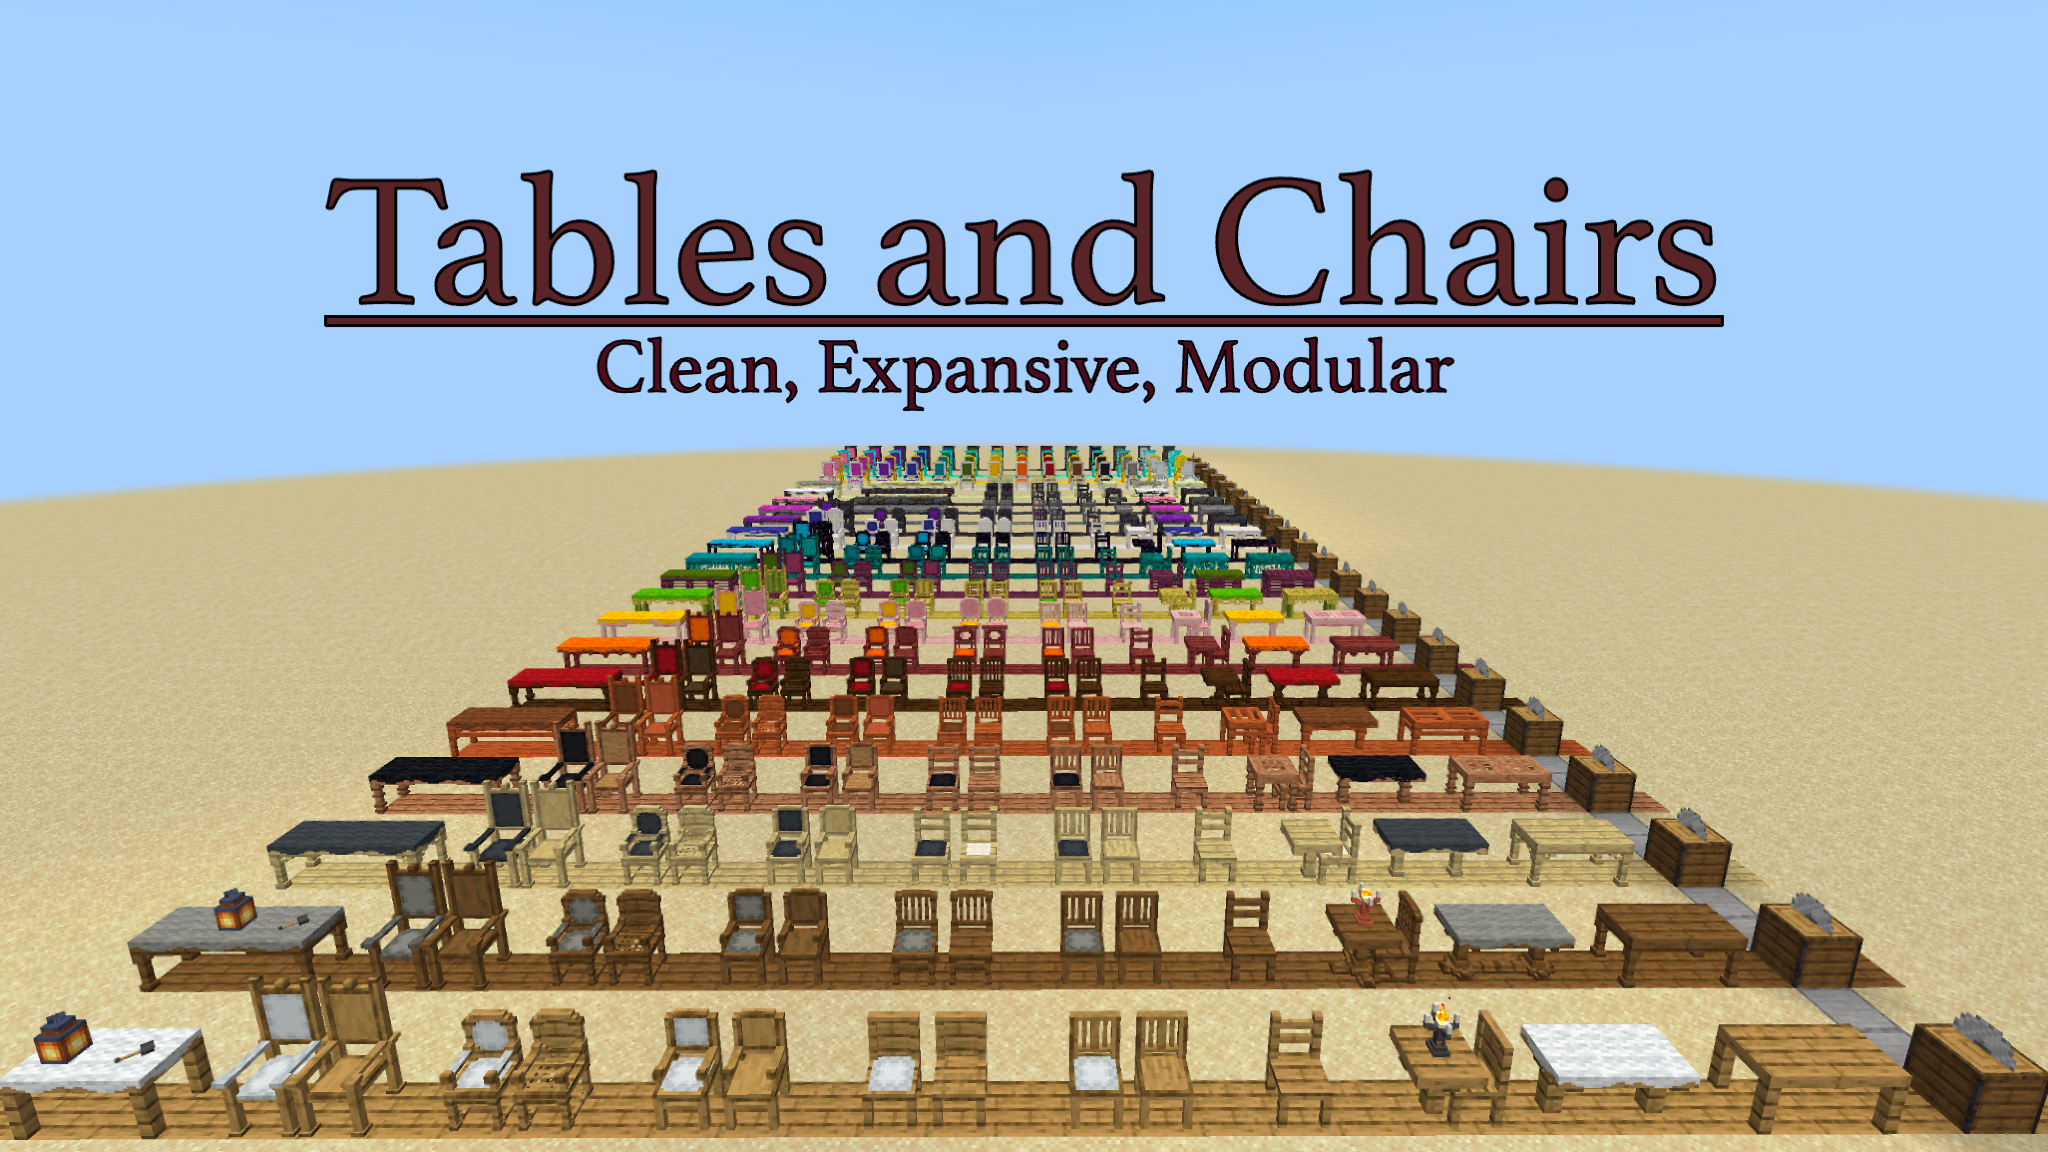 The Best (and possibly only) Modular Table and Chair datapack around! There's plenty of furniture packs, but I haven't seen any as customizable as this classic! 